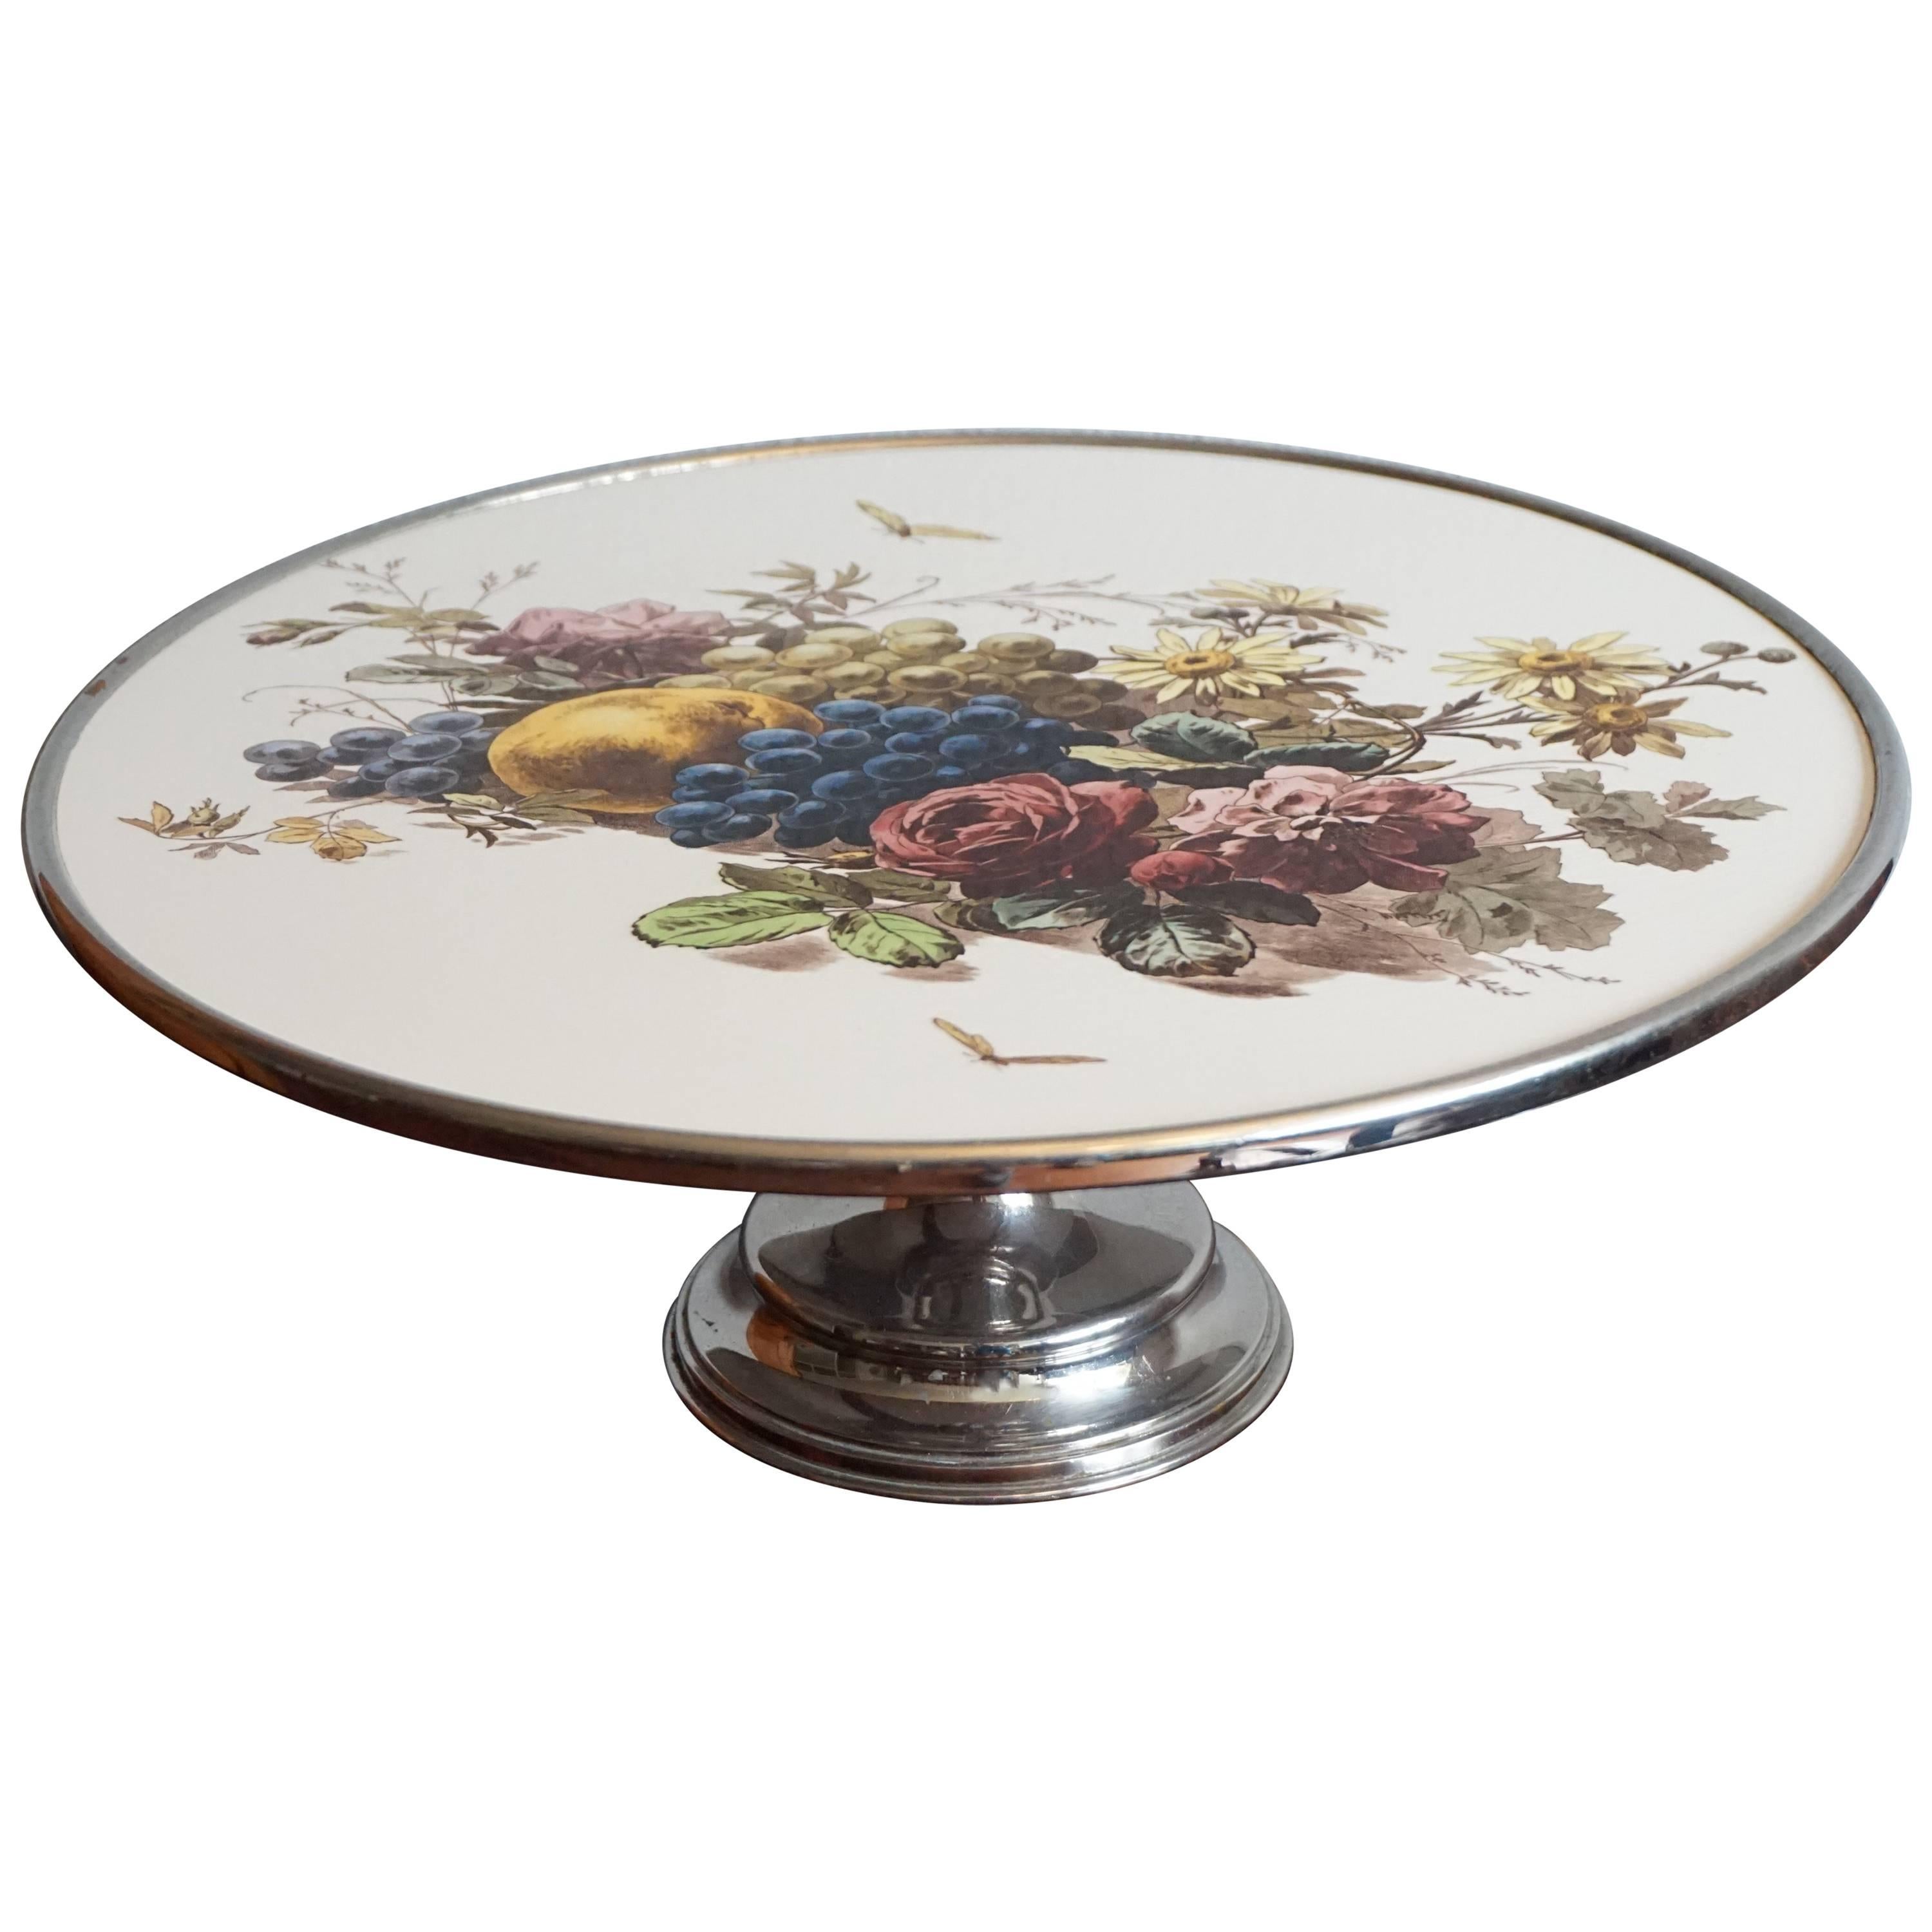 Early 20th Century Fruit & Flowers Porcelain Tile Pie Stand on Chrome Metal Base